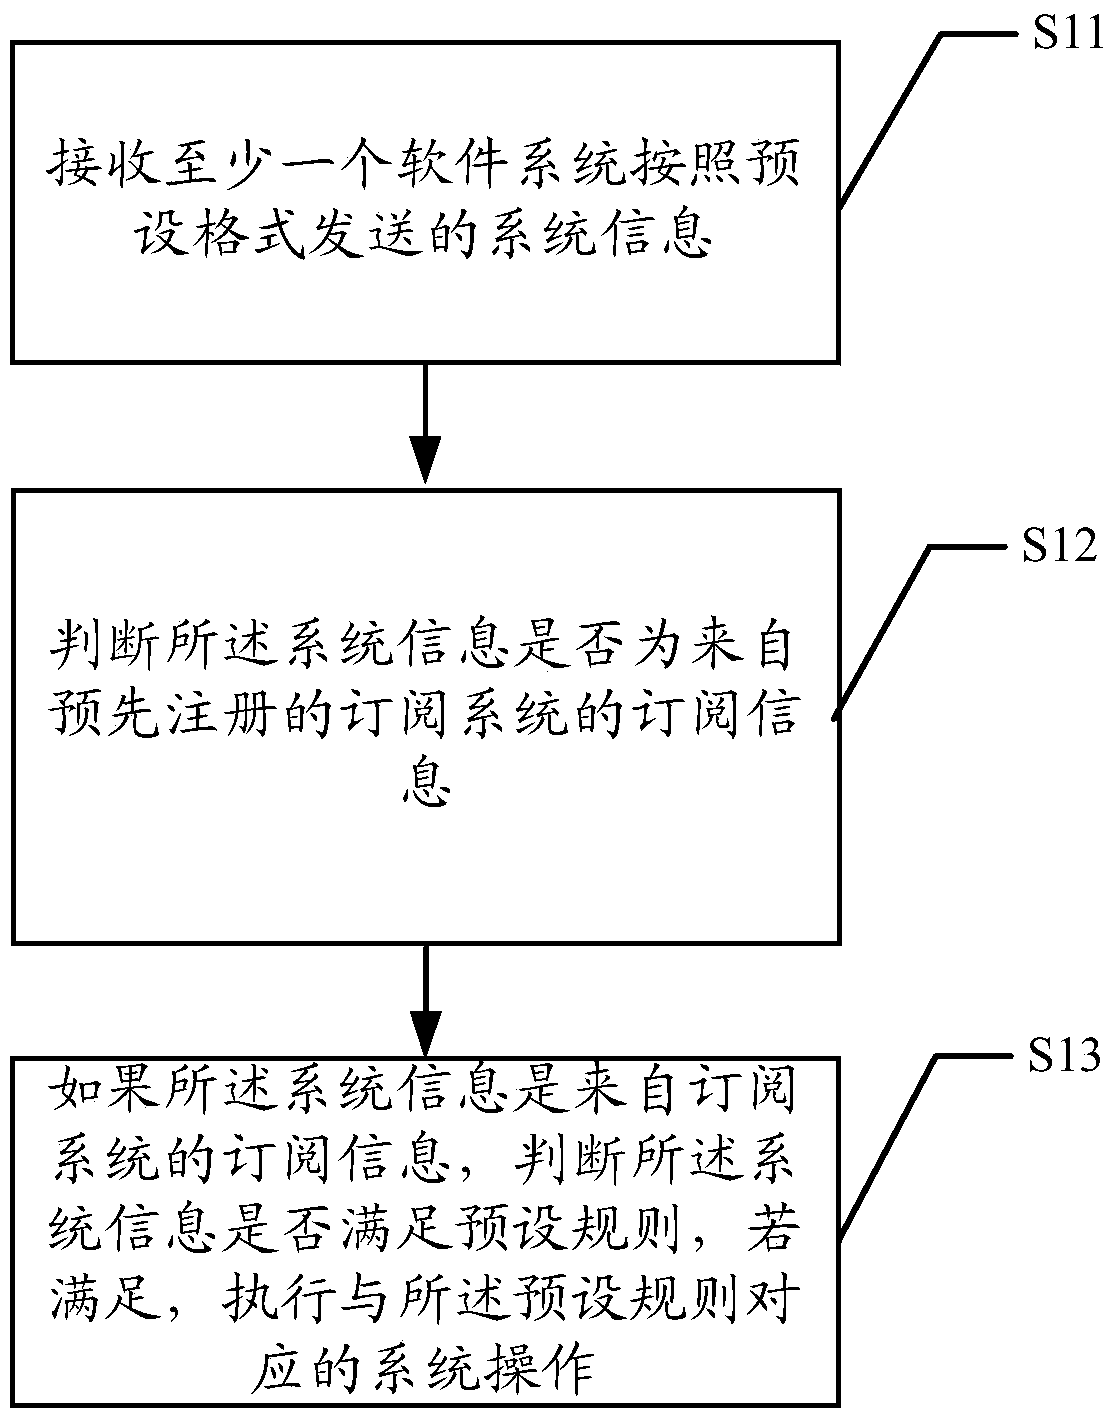 Information interaction method and middleware system between software systems